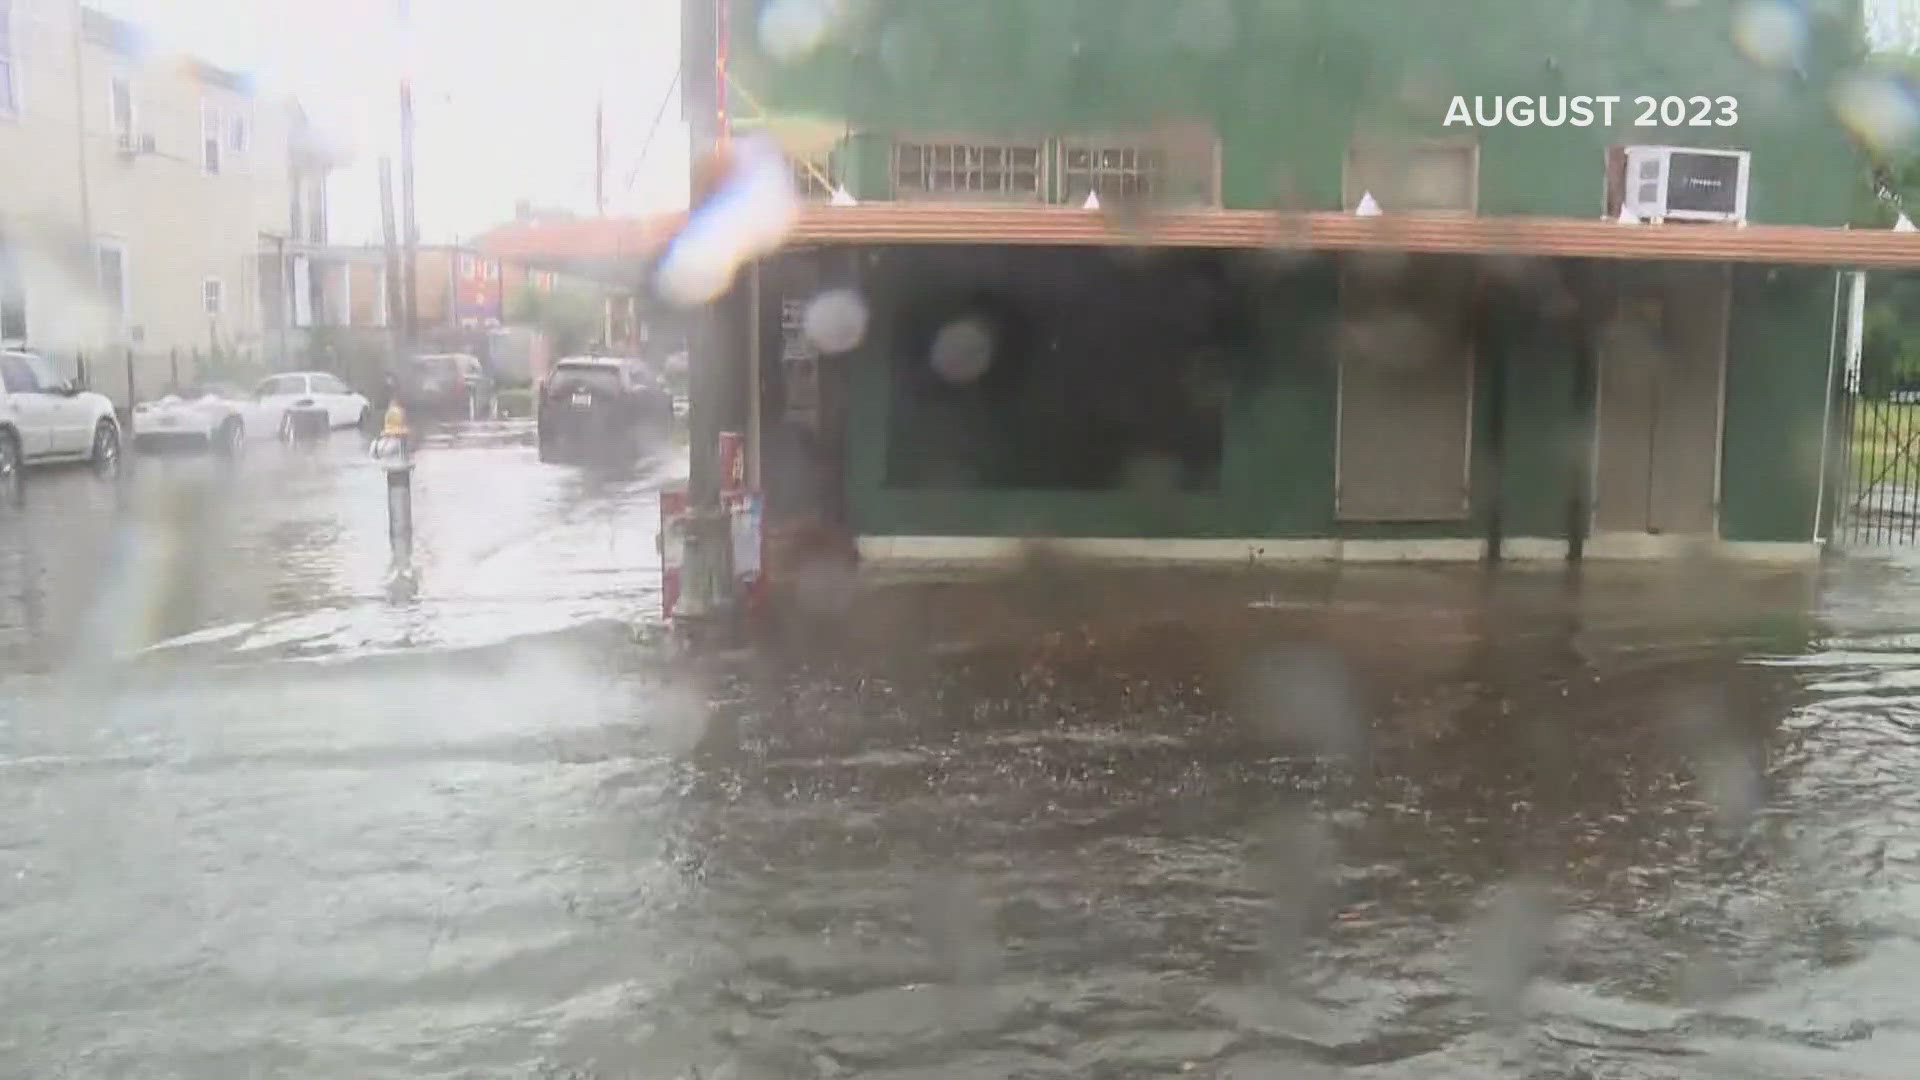 Owner Arkesha Baquet shot a cellphone video of street flooding outside the restaurant on Monday and shared it on L’il Dizzy’s social media pages.